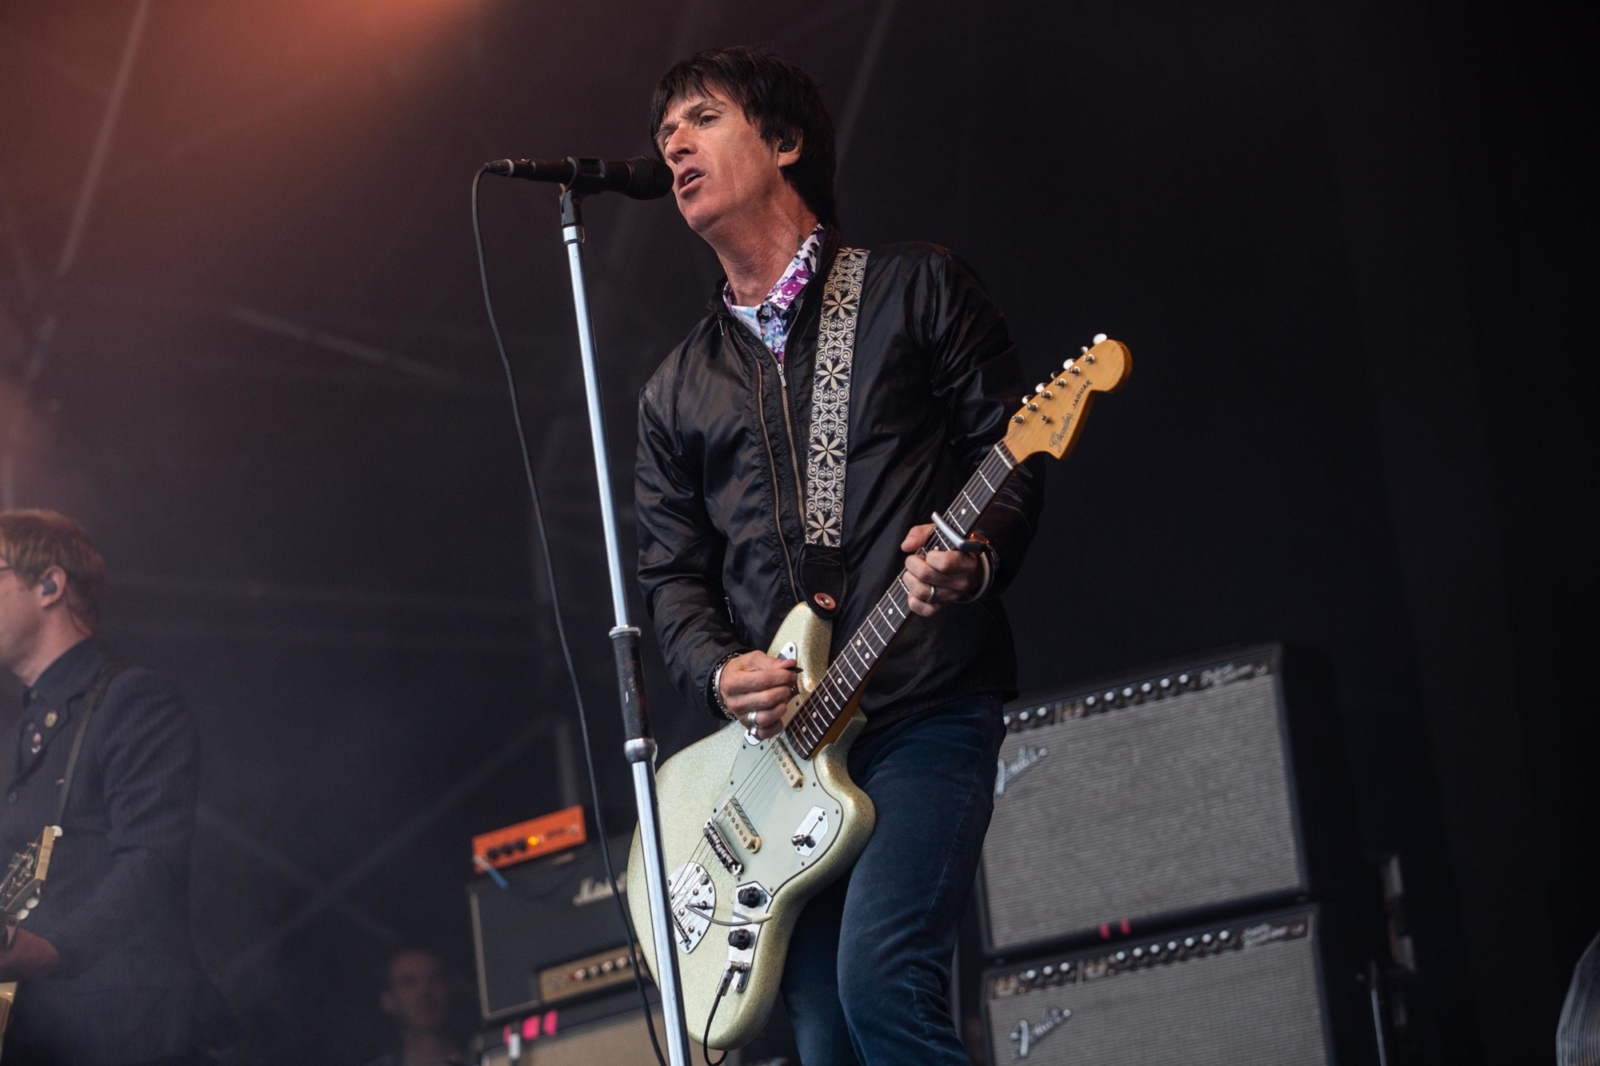 Johnny Marr releases new track 'The Bright Parade': “If you're brave enough, you can go anywhere you want”